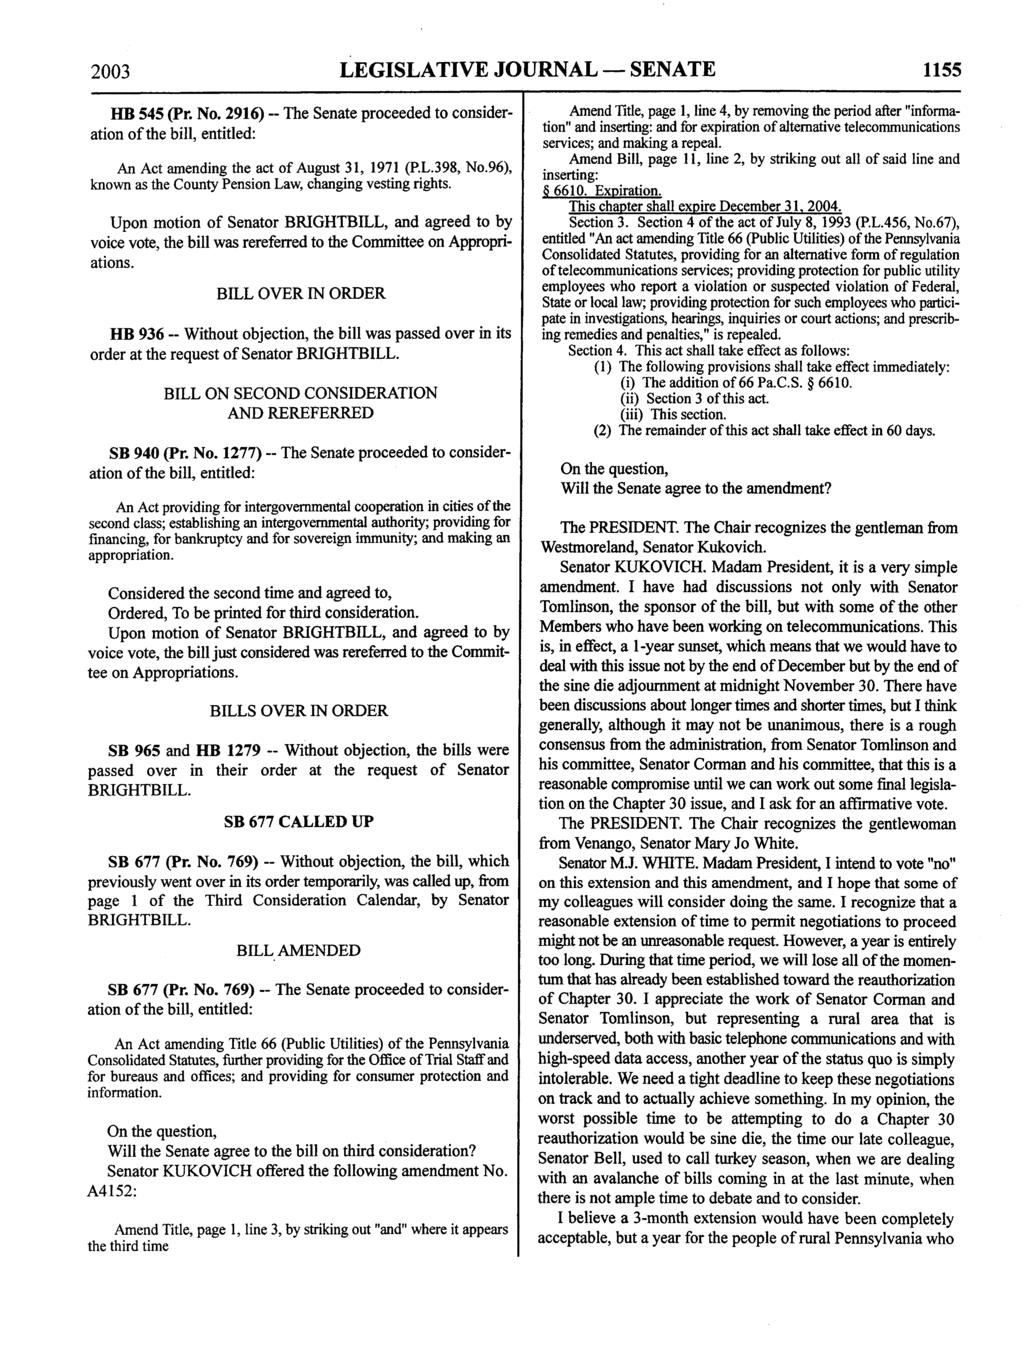 2003 LEGISLATIVE JOURNAL SENATE 1155 HB 545 (Pr. No. 2916) - The Senate proceeded to consideration of the bill, entitled: An Act amending the act of August 31, 1971 (RL.398, No.